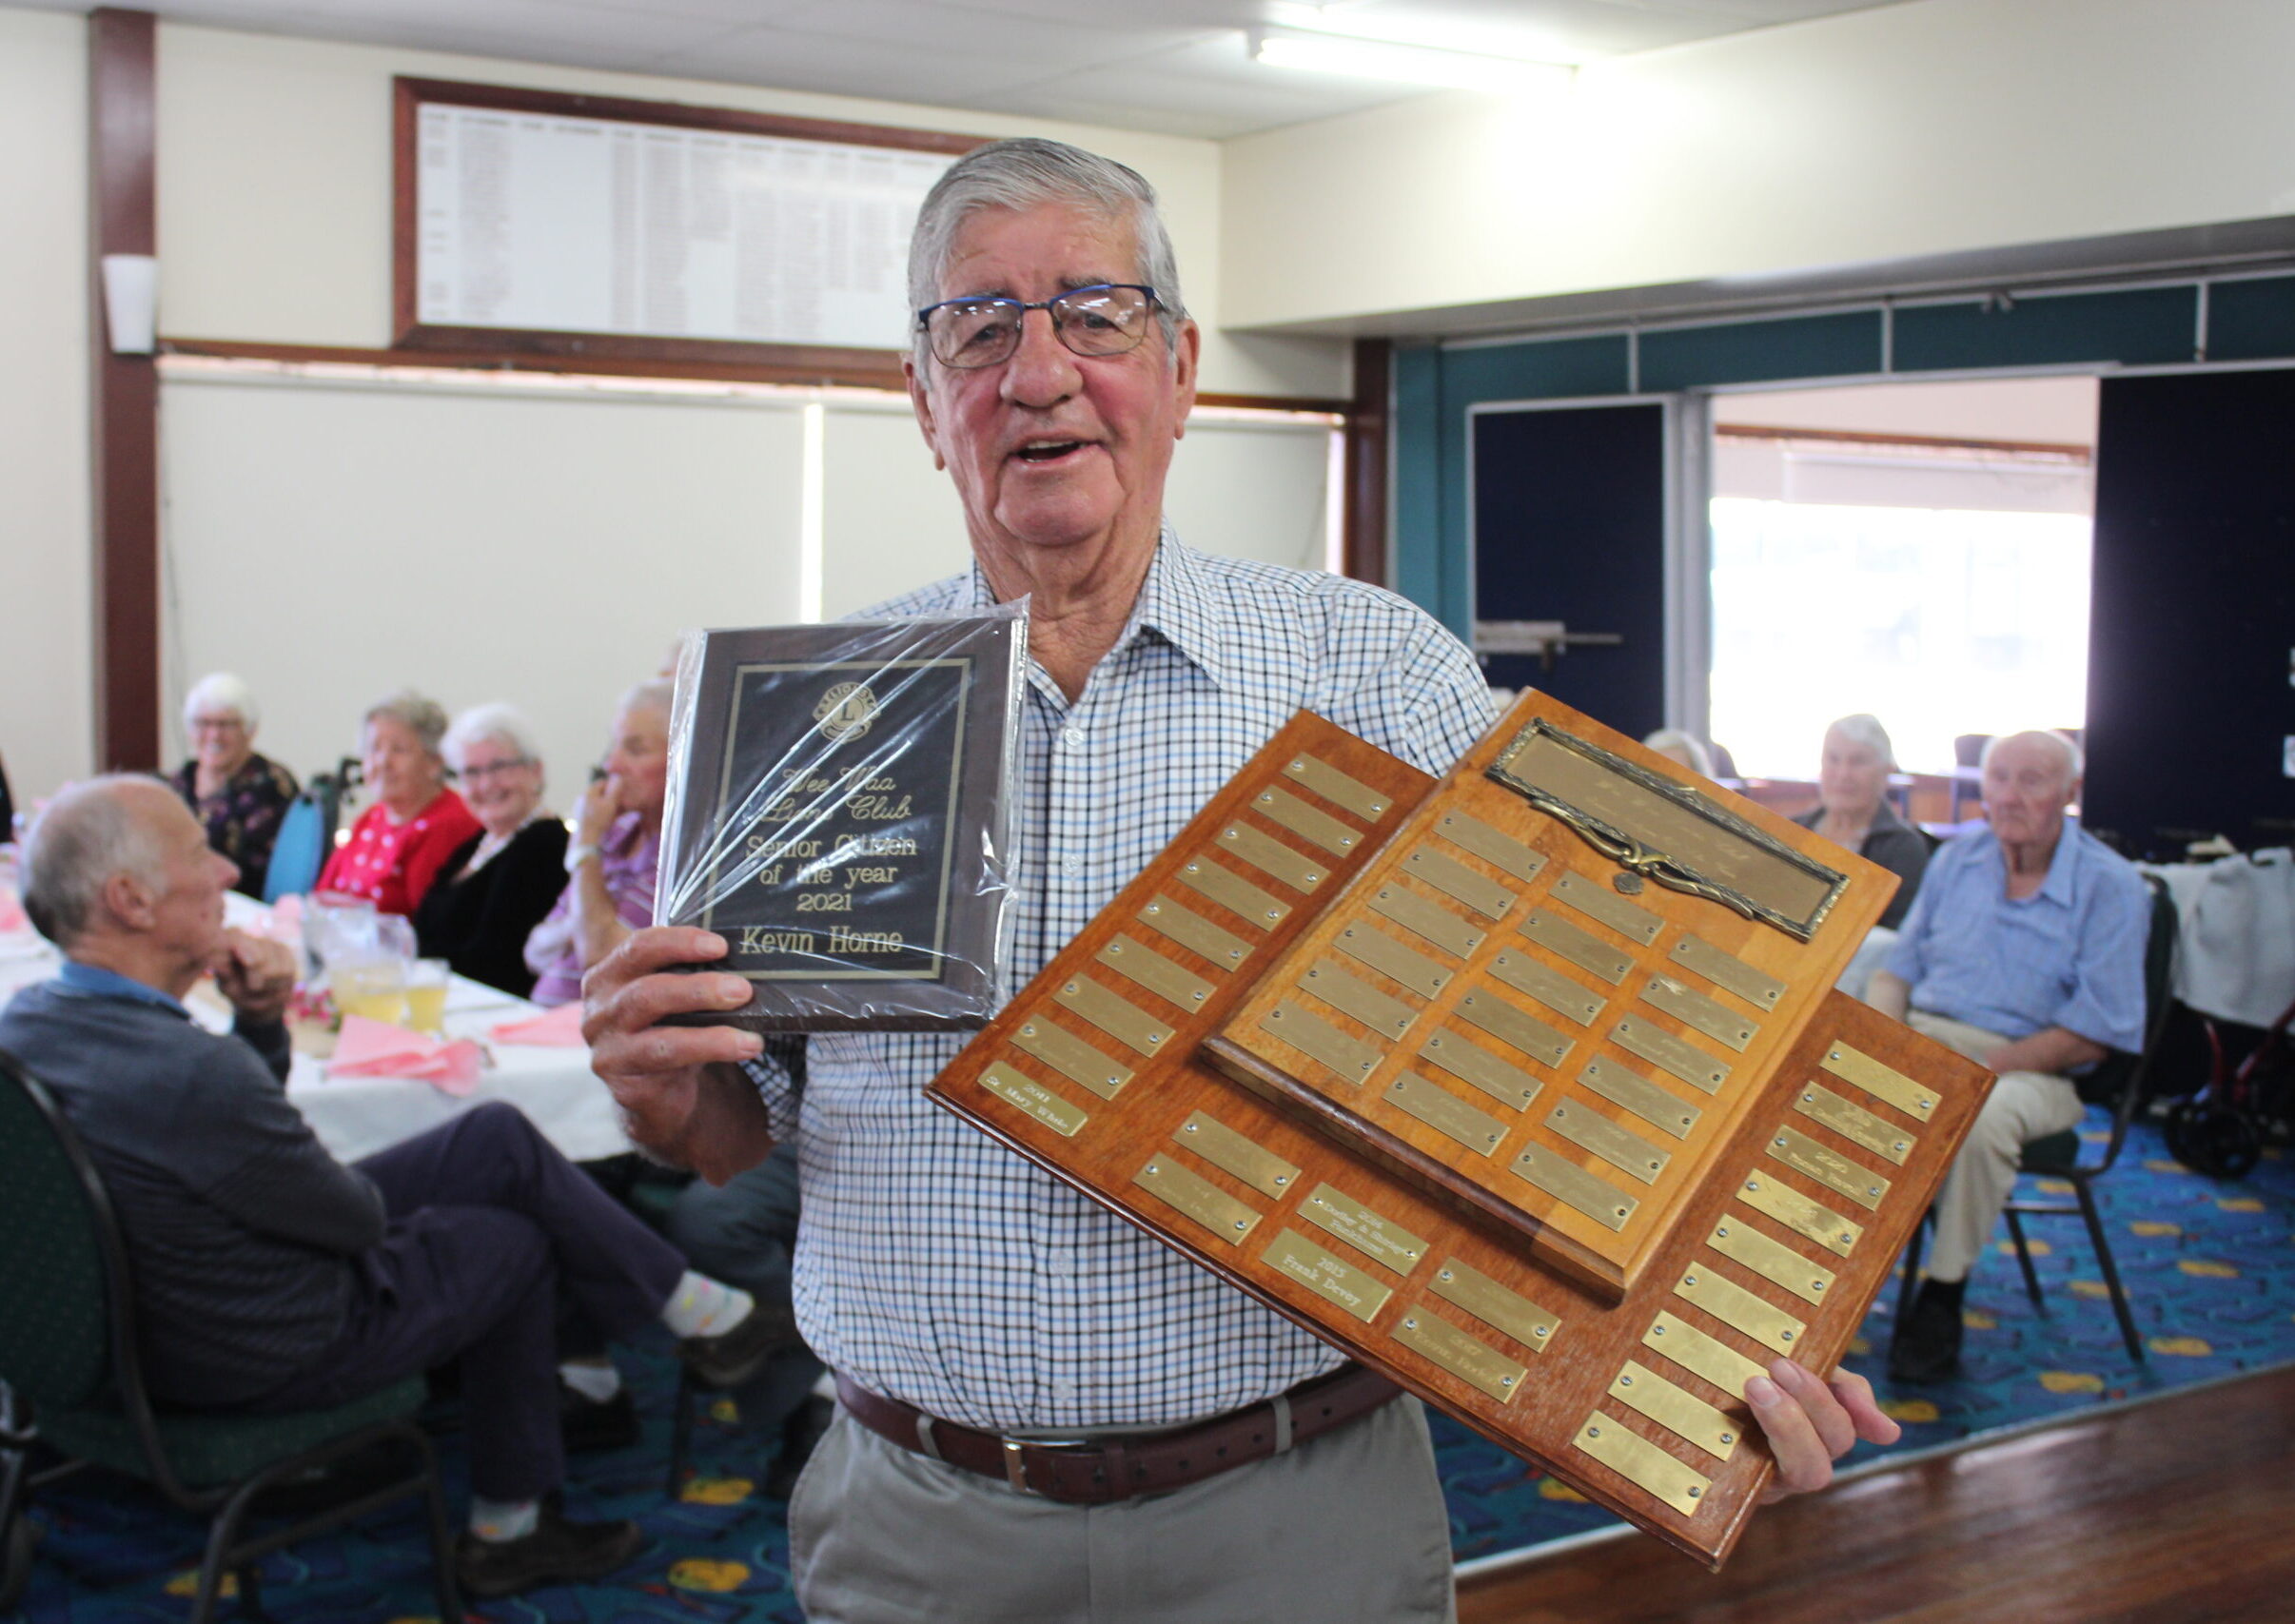 Kevin Horne named Wee Waa Lions Club’s 2021 citizen of the year | PHOTOS